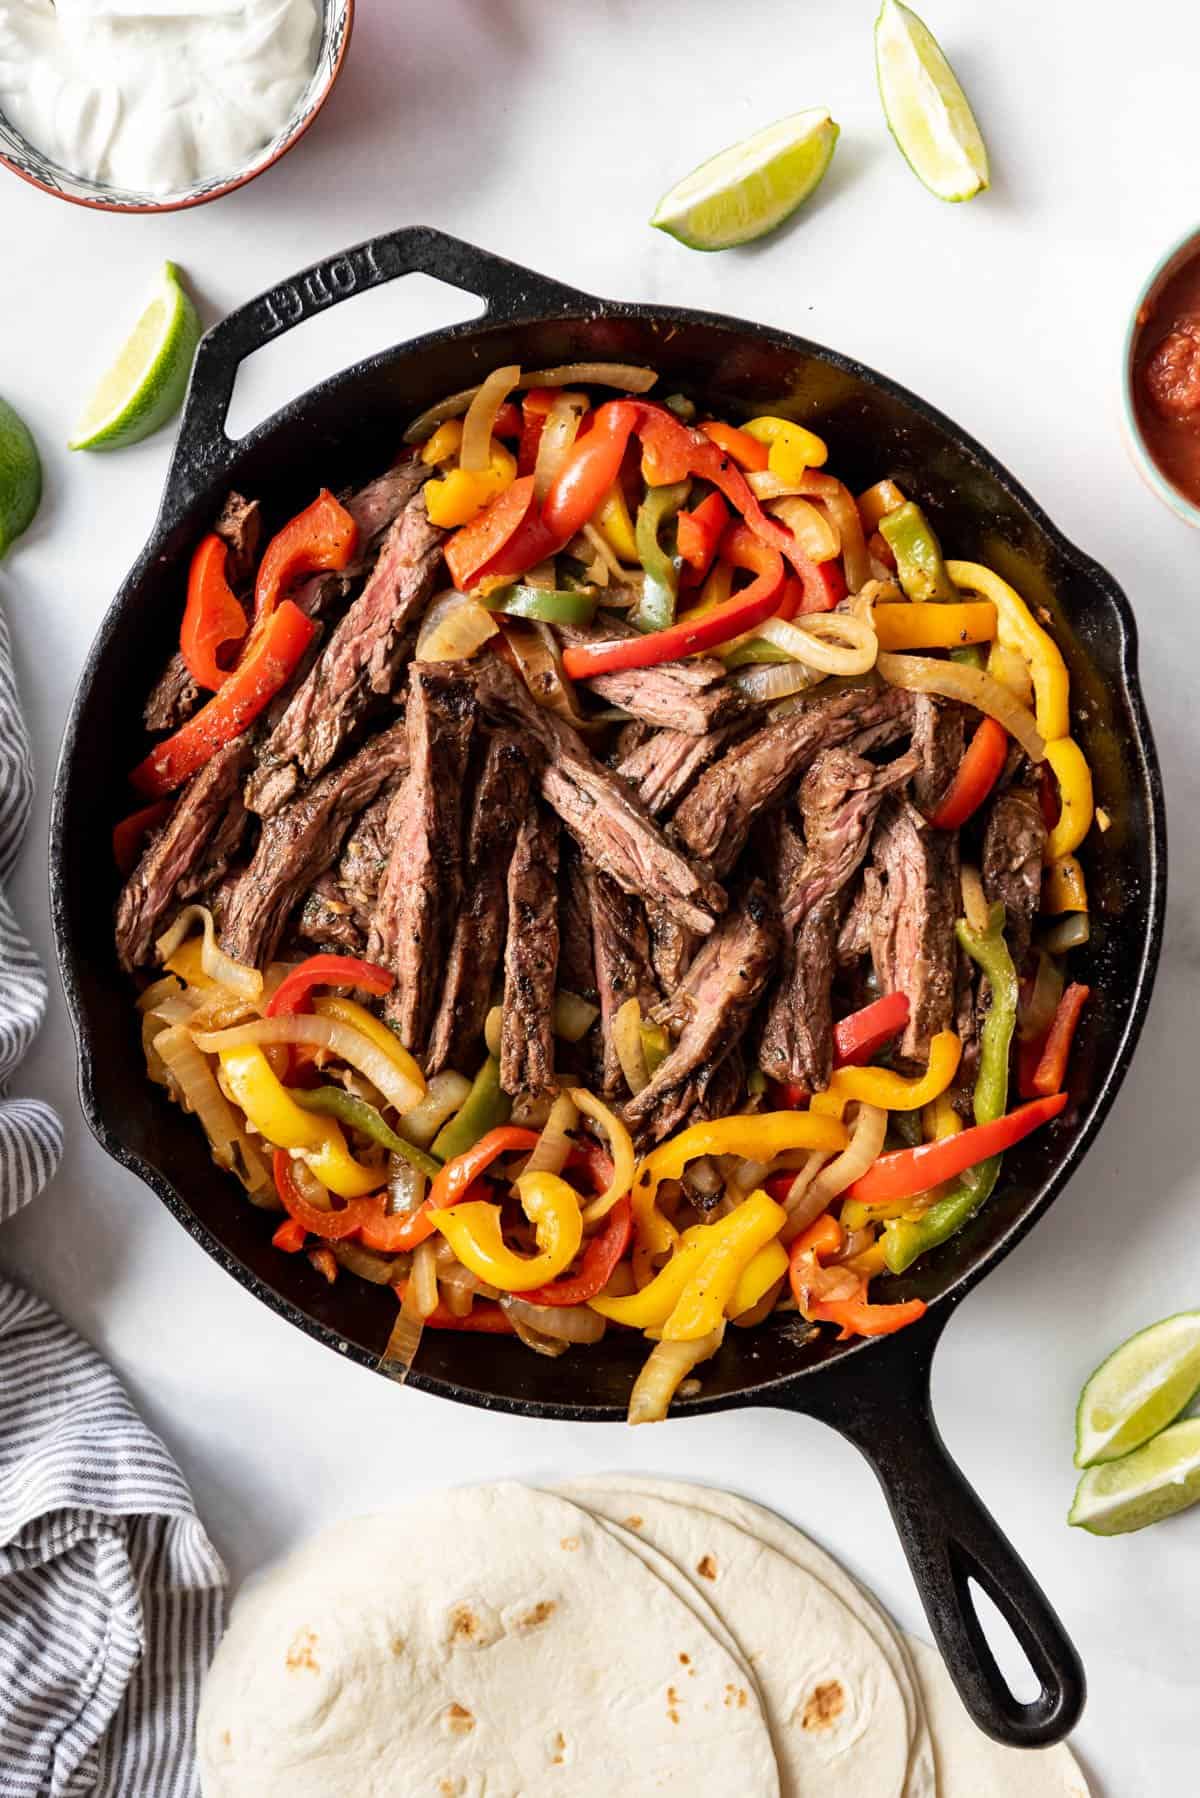 A cast iron skillet with steak fajita filling surrounded by tortillas, sour cream, and limes.